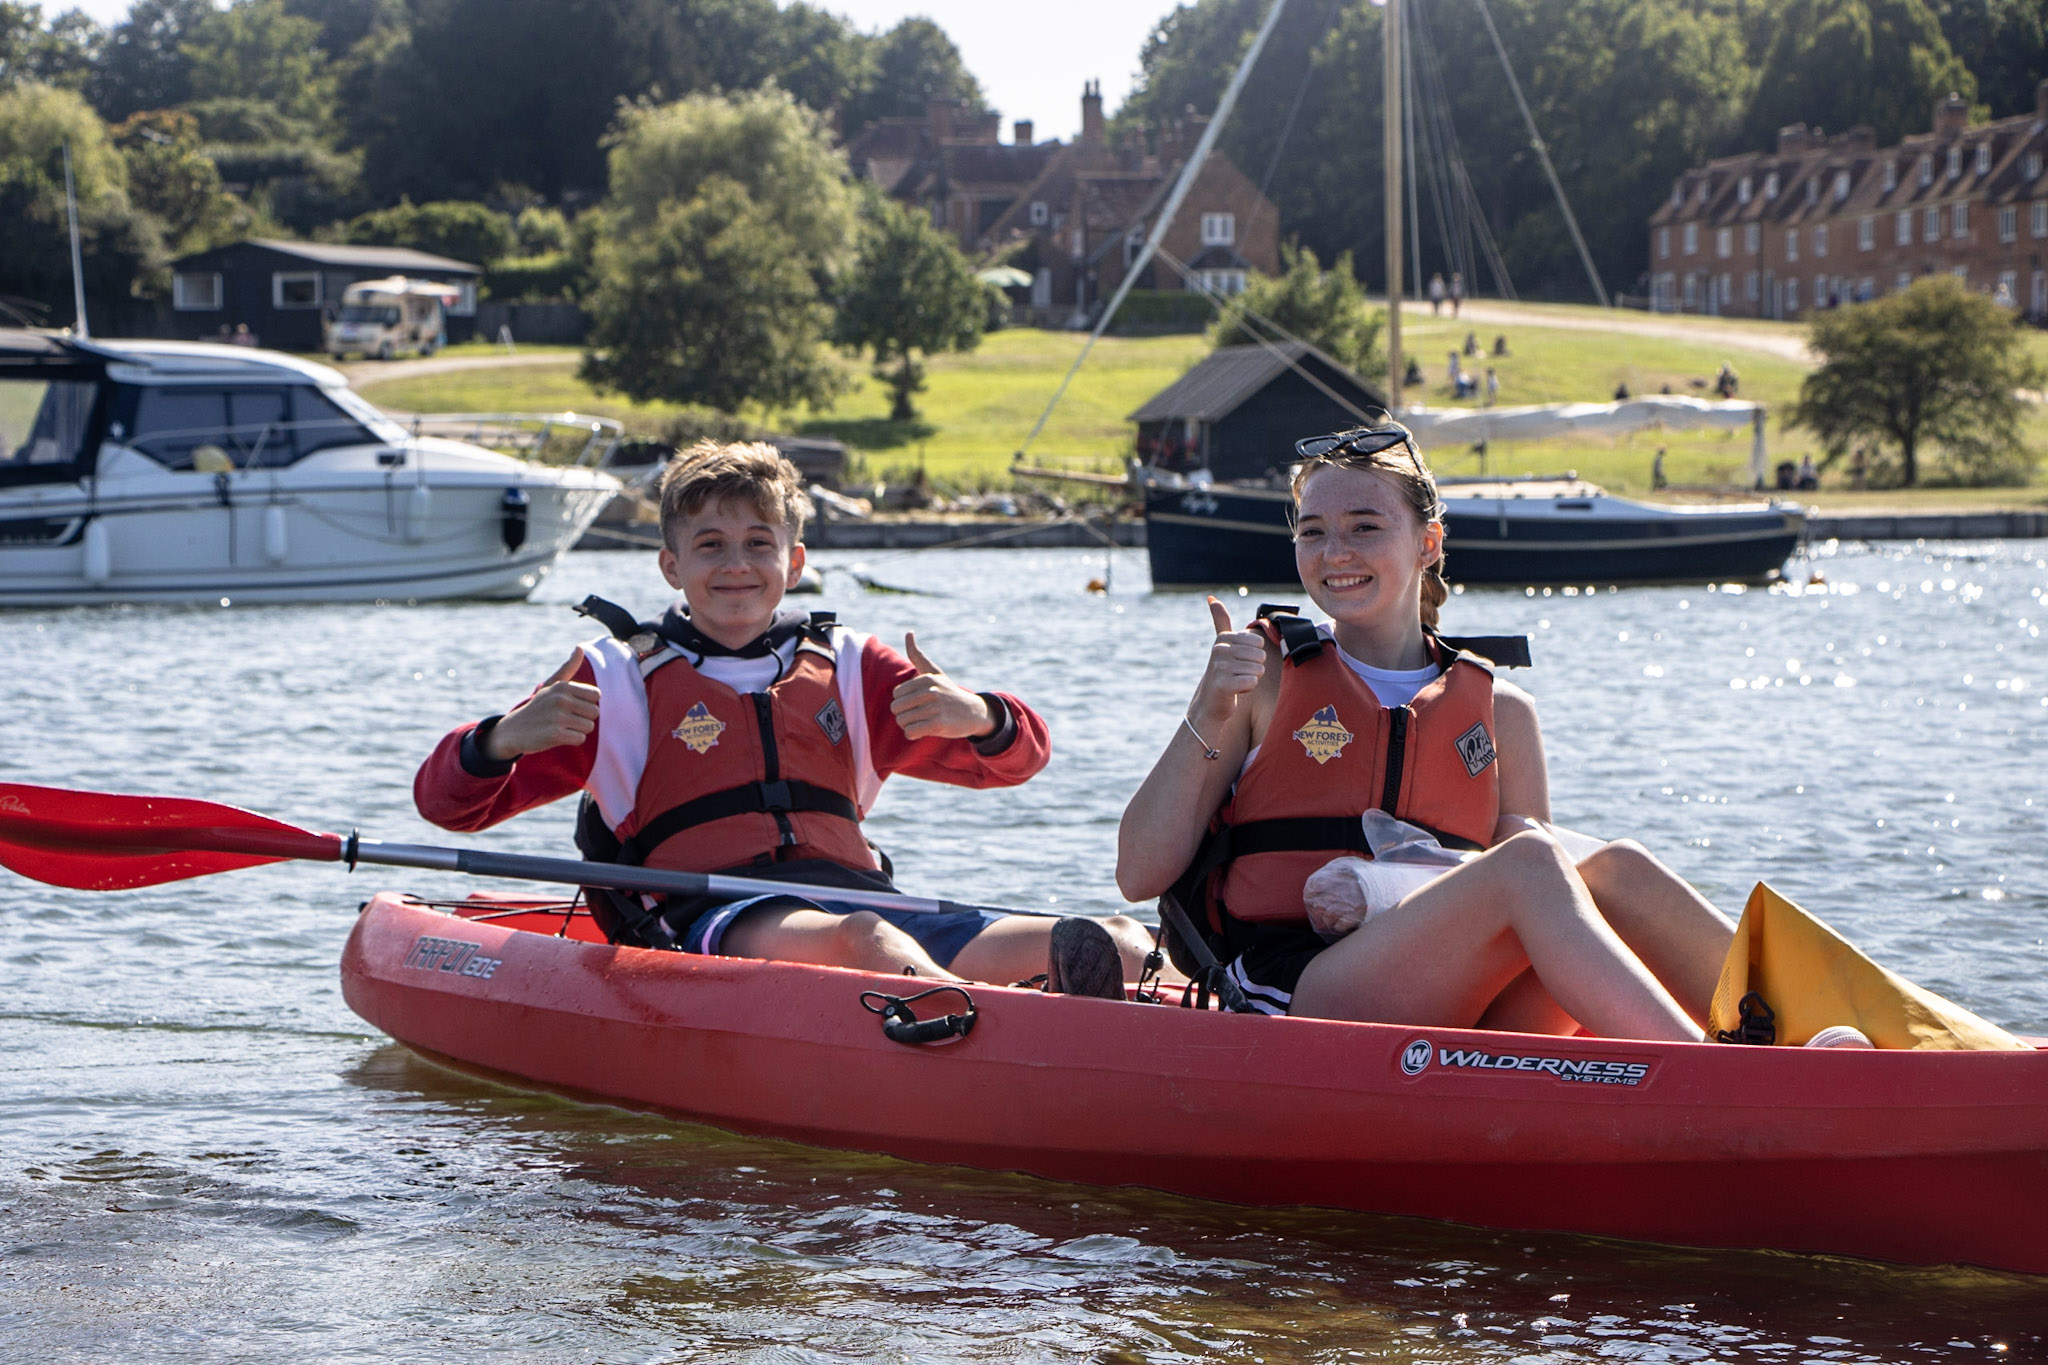 Two students enjoying kayaking on the Beaulieu River as part of a school trip in The New Forest